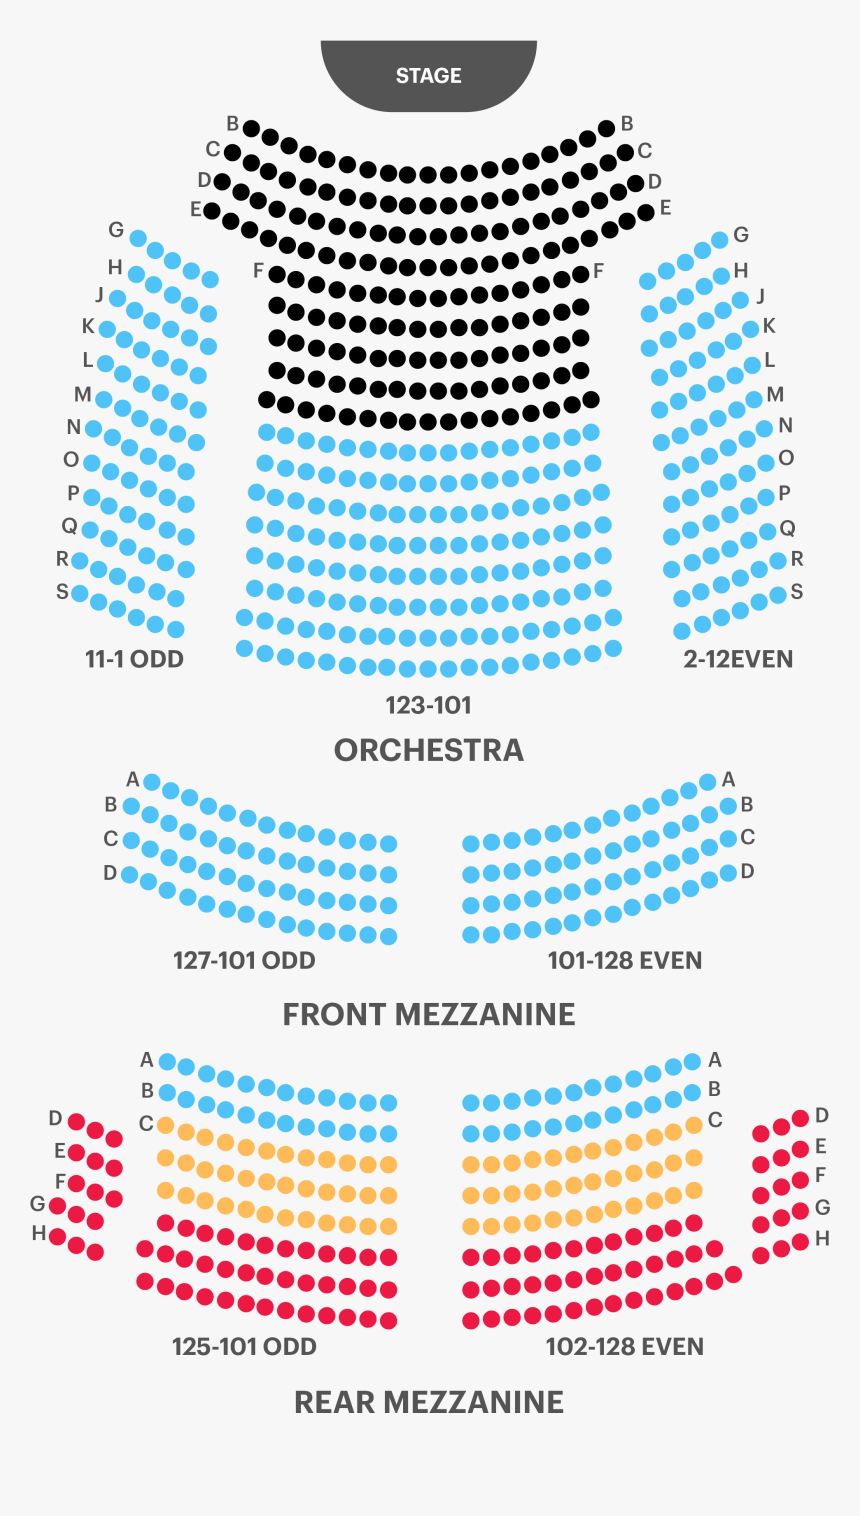 Golden State Theater Monterey Seating Chart